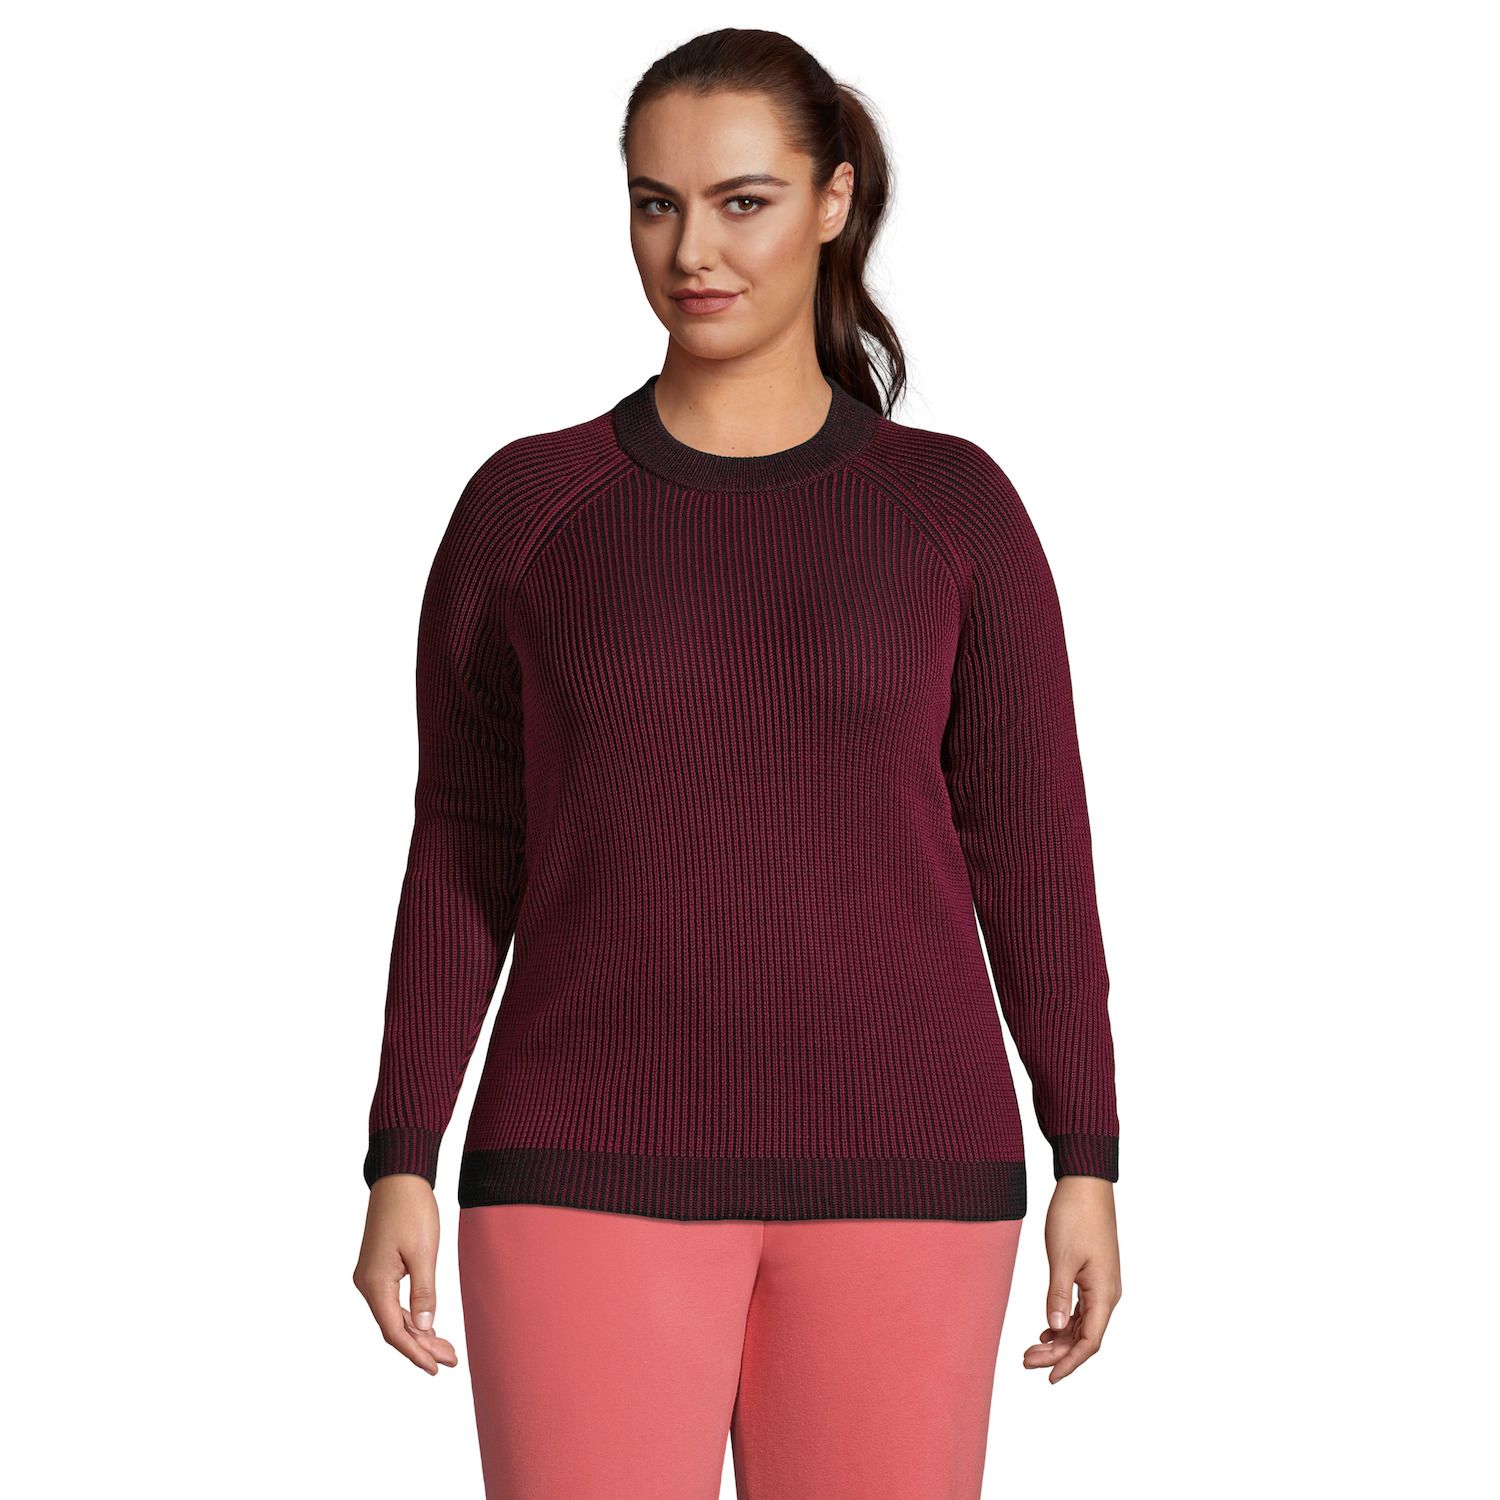 Image for Lands' End Plus Size Cotton Drifter Shaker Doubled Crewneck Sweater at Kohl's.